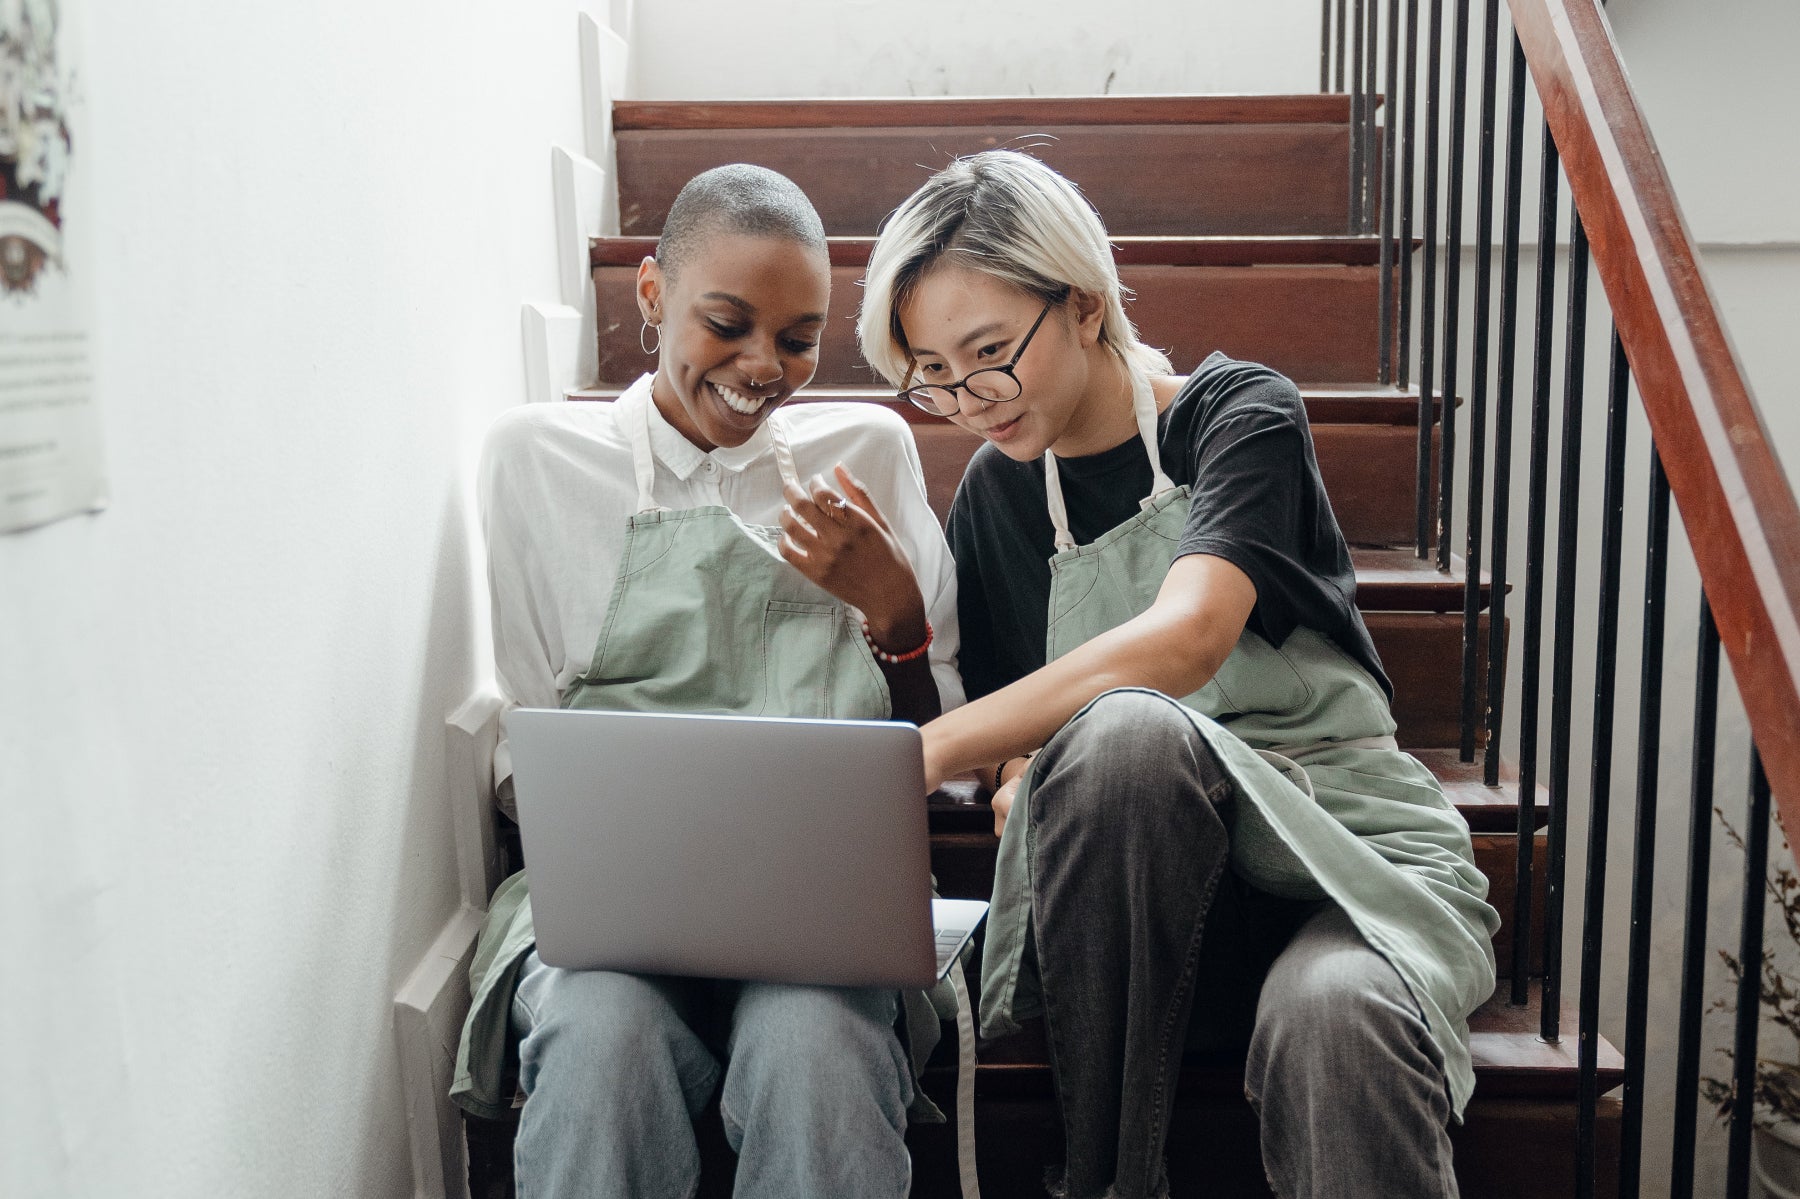 Two students sit on a stair looking at a laptop